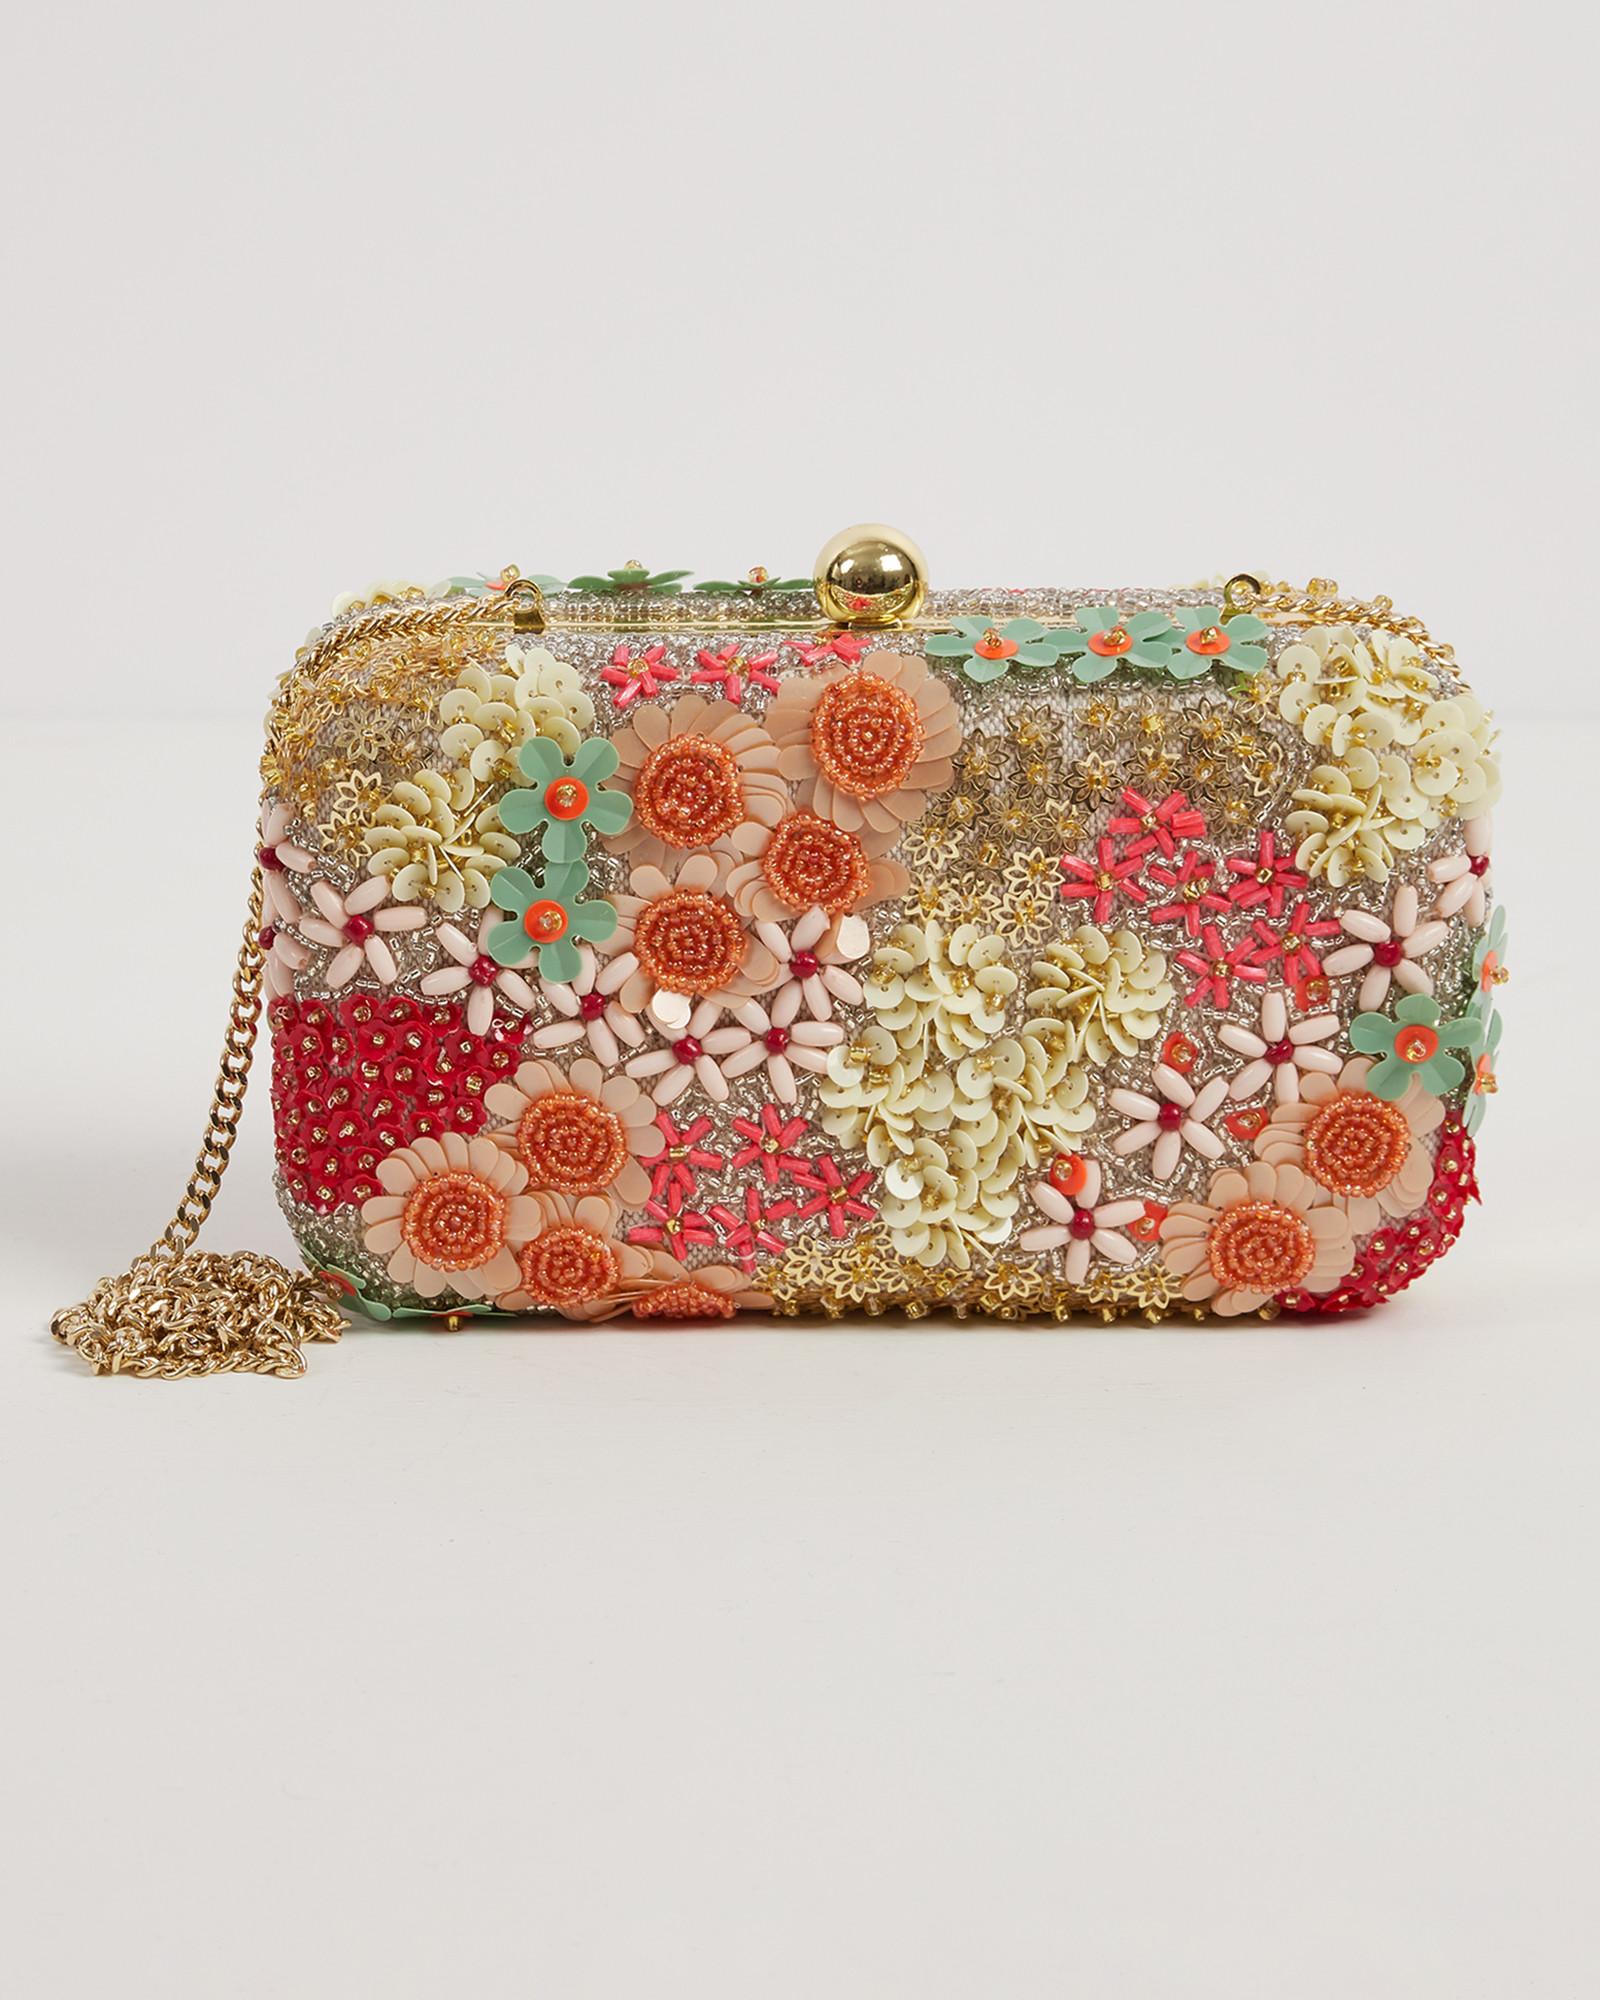 Oliver Bonas Mixed Floral Beaded Rectangular Clutch Bag in Pink